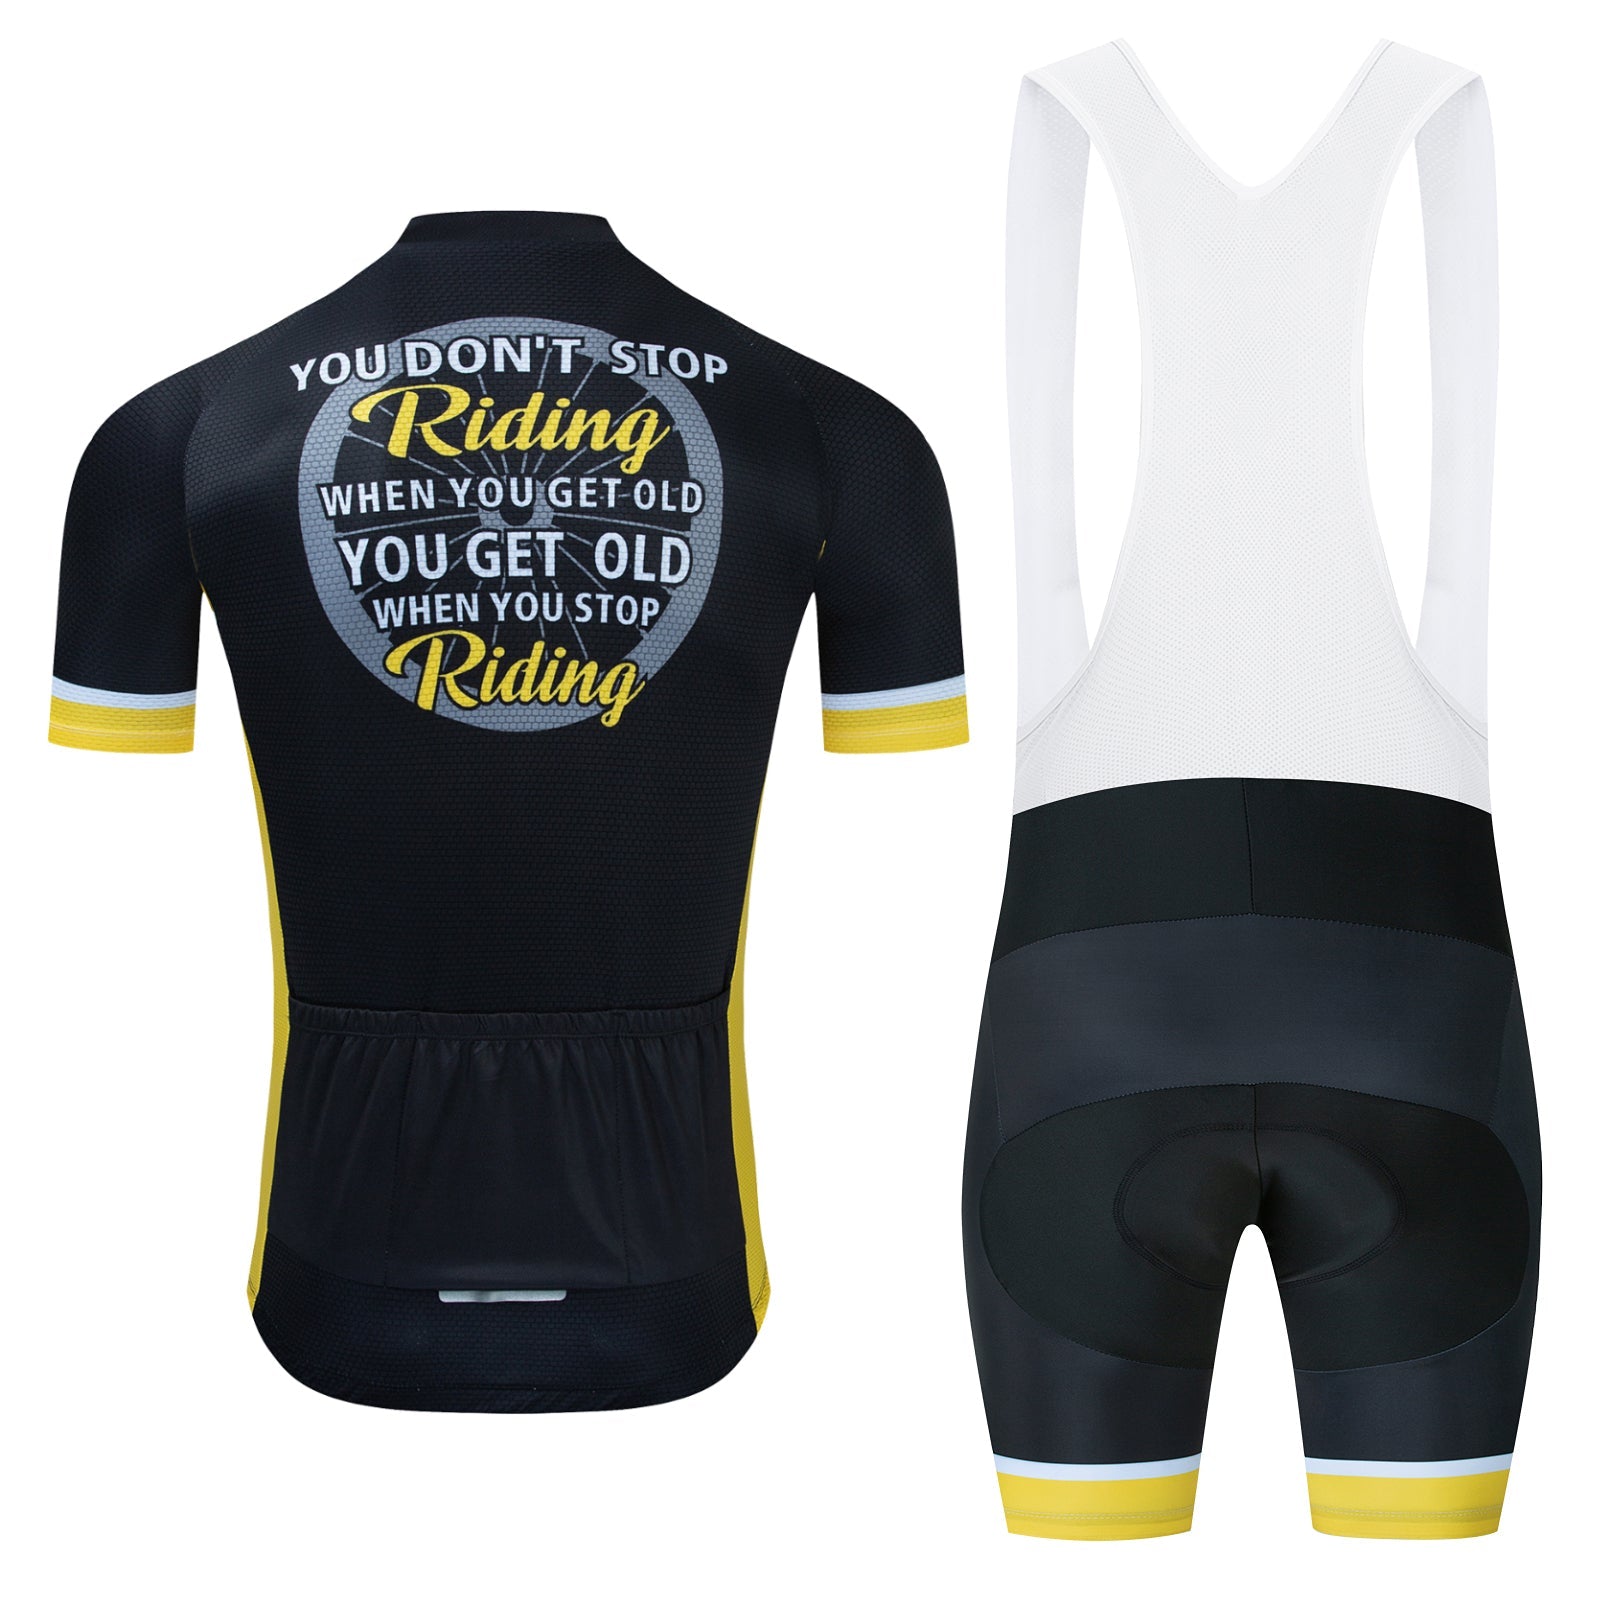 Don't Stop Riding Cycling Jersey Set